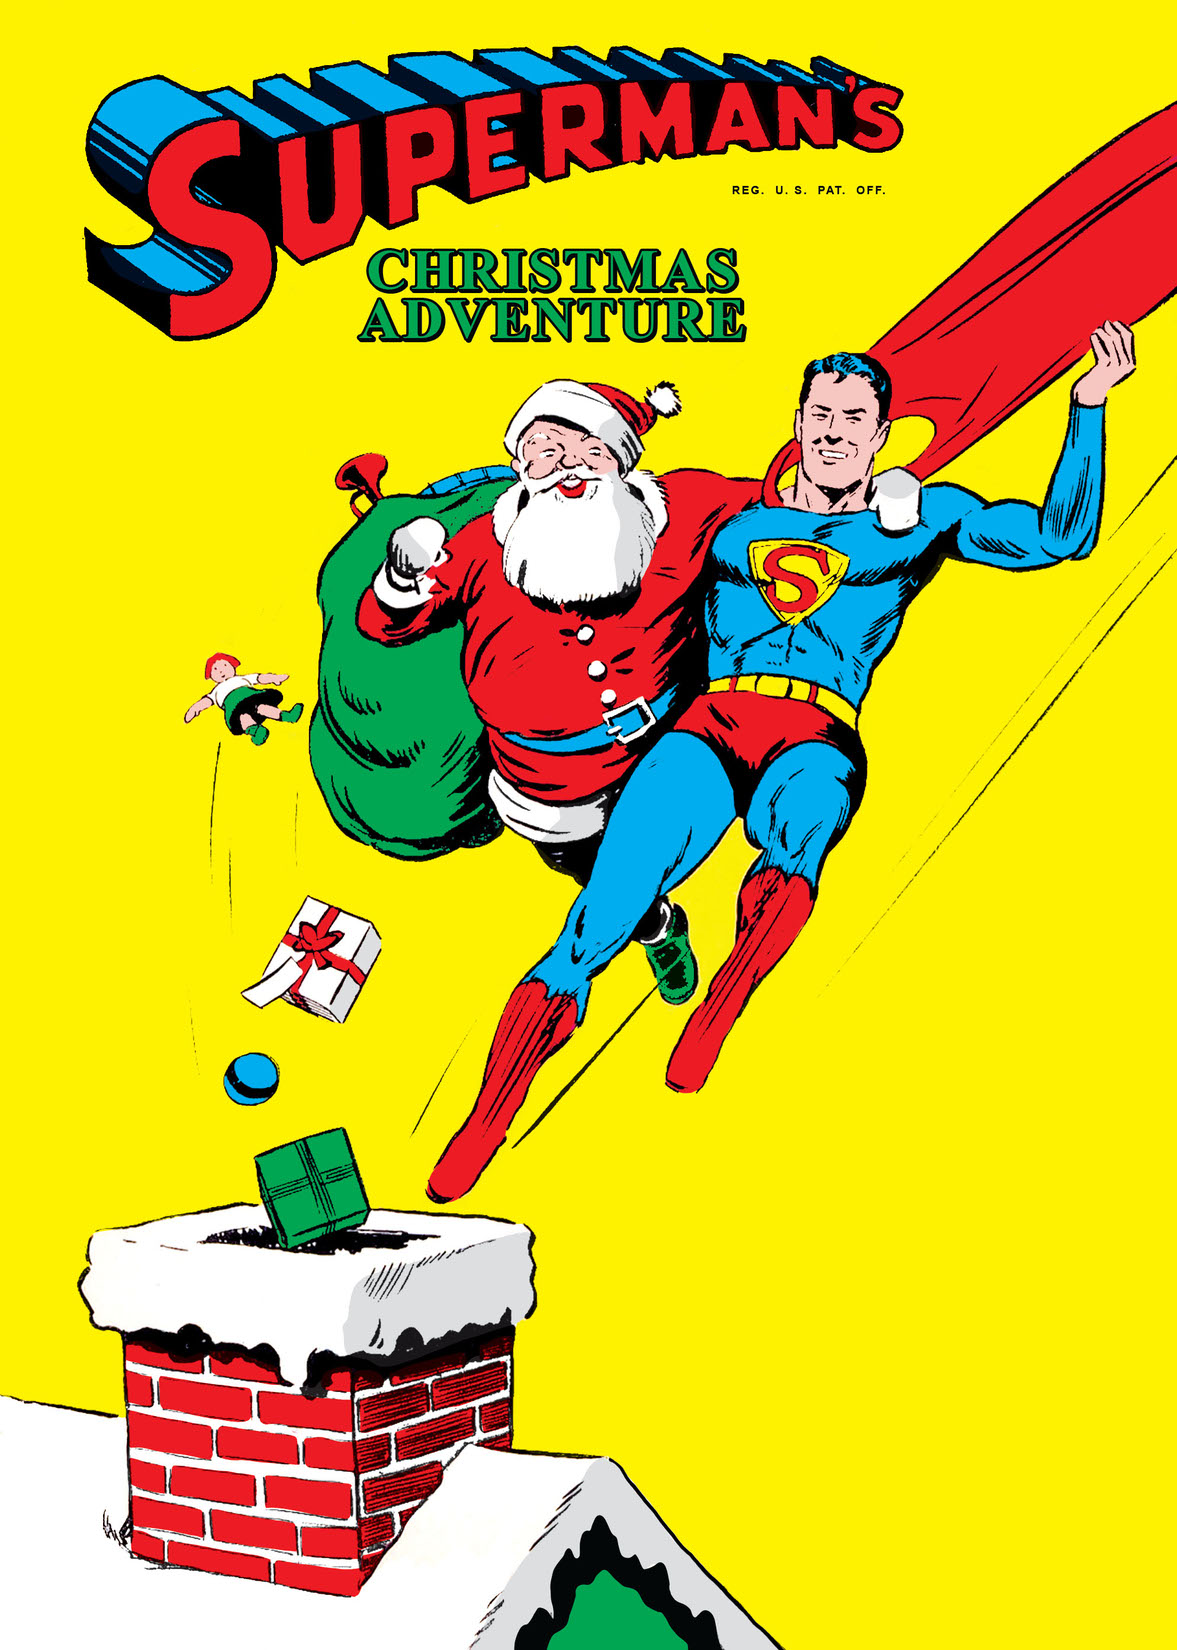 Superman's Christmas Adventure #1 preview images